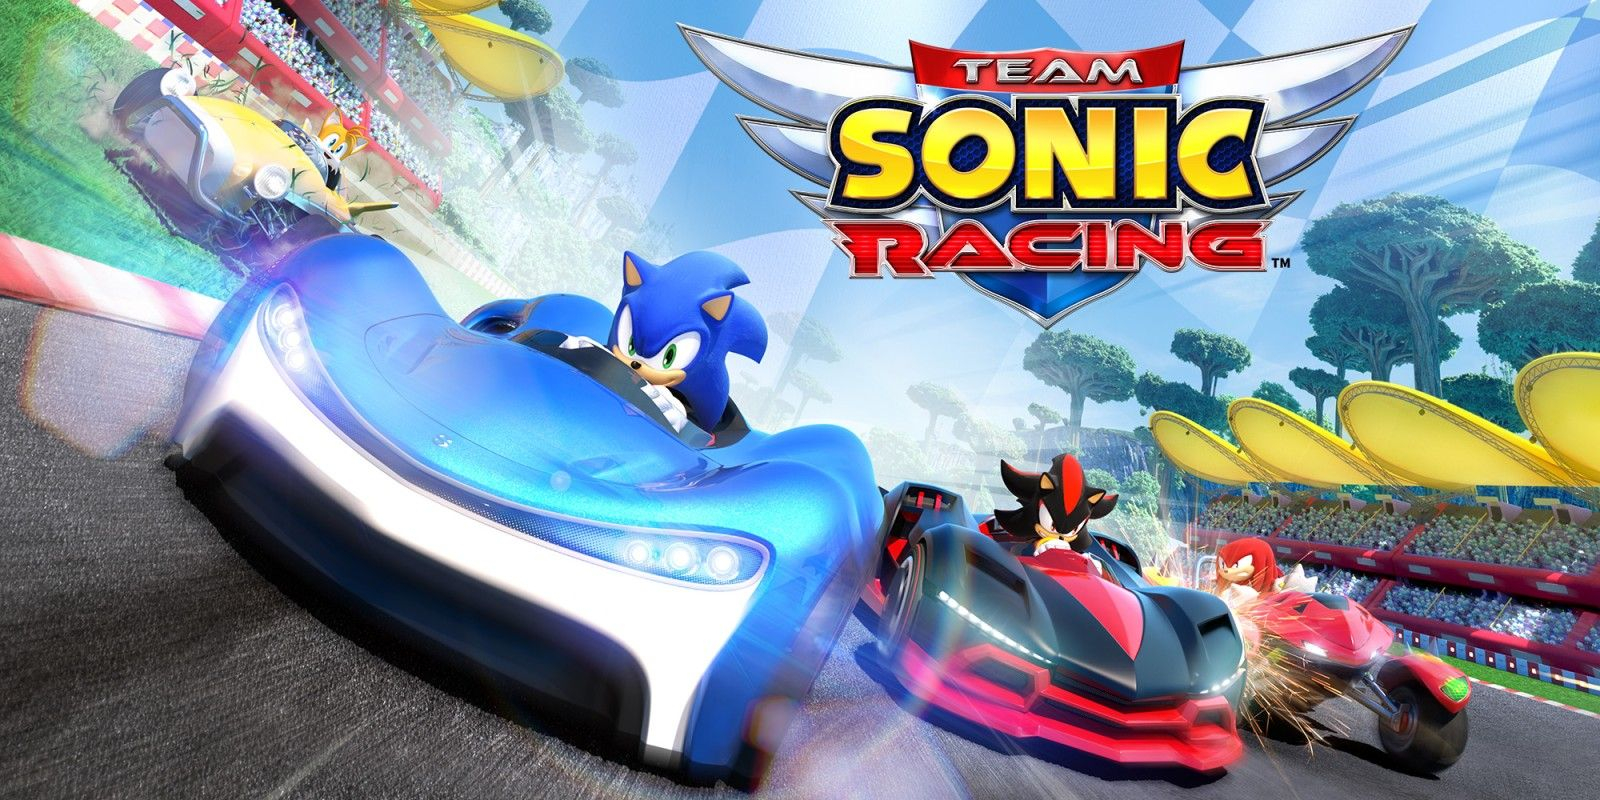 106Â° - Team Sonic Racing Switch physical copy Â£22.99 delivered @ GAME